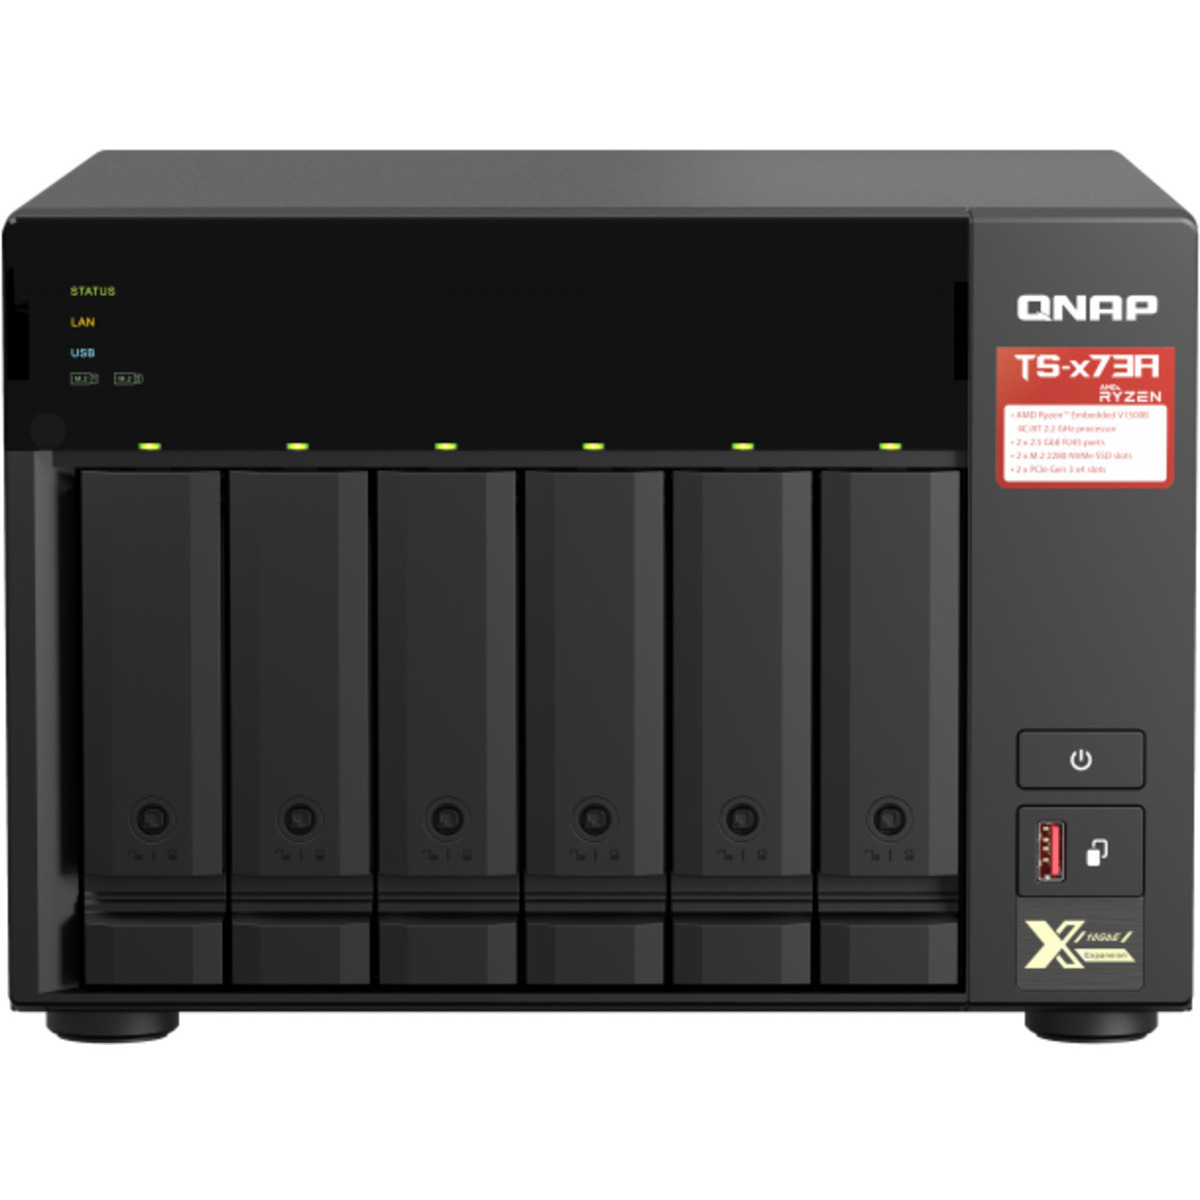 QNAP TS-673A 108tb 6-Bay Desktop Multimedia / Power User / Business NAS - Network Attached Storage Device 6x18tb Seagate IronWolf Pro ST18000NT001 3.5 7200rpm SATA 6Gb/s HDD NAS Class Drives Installed - Burn-In Tested TS-673A